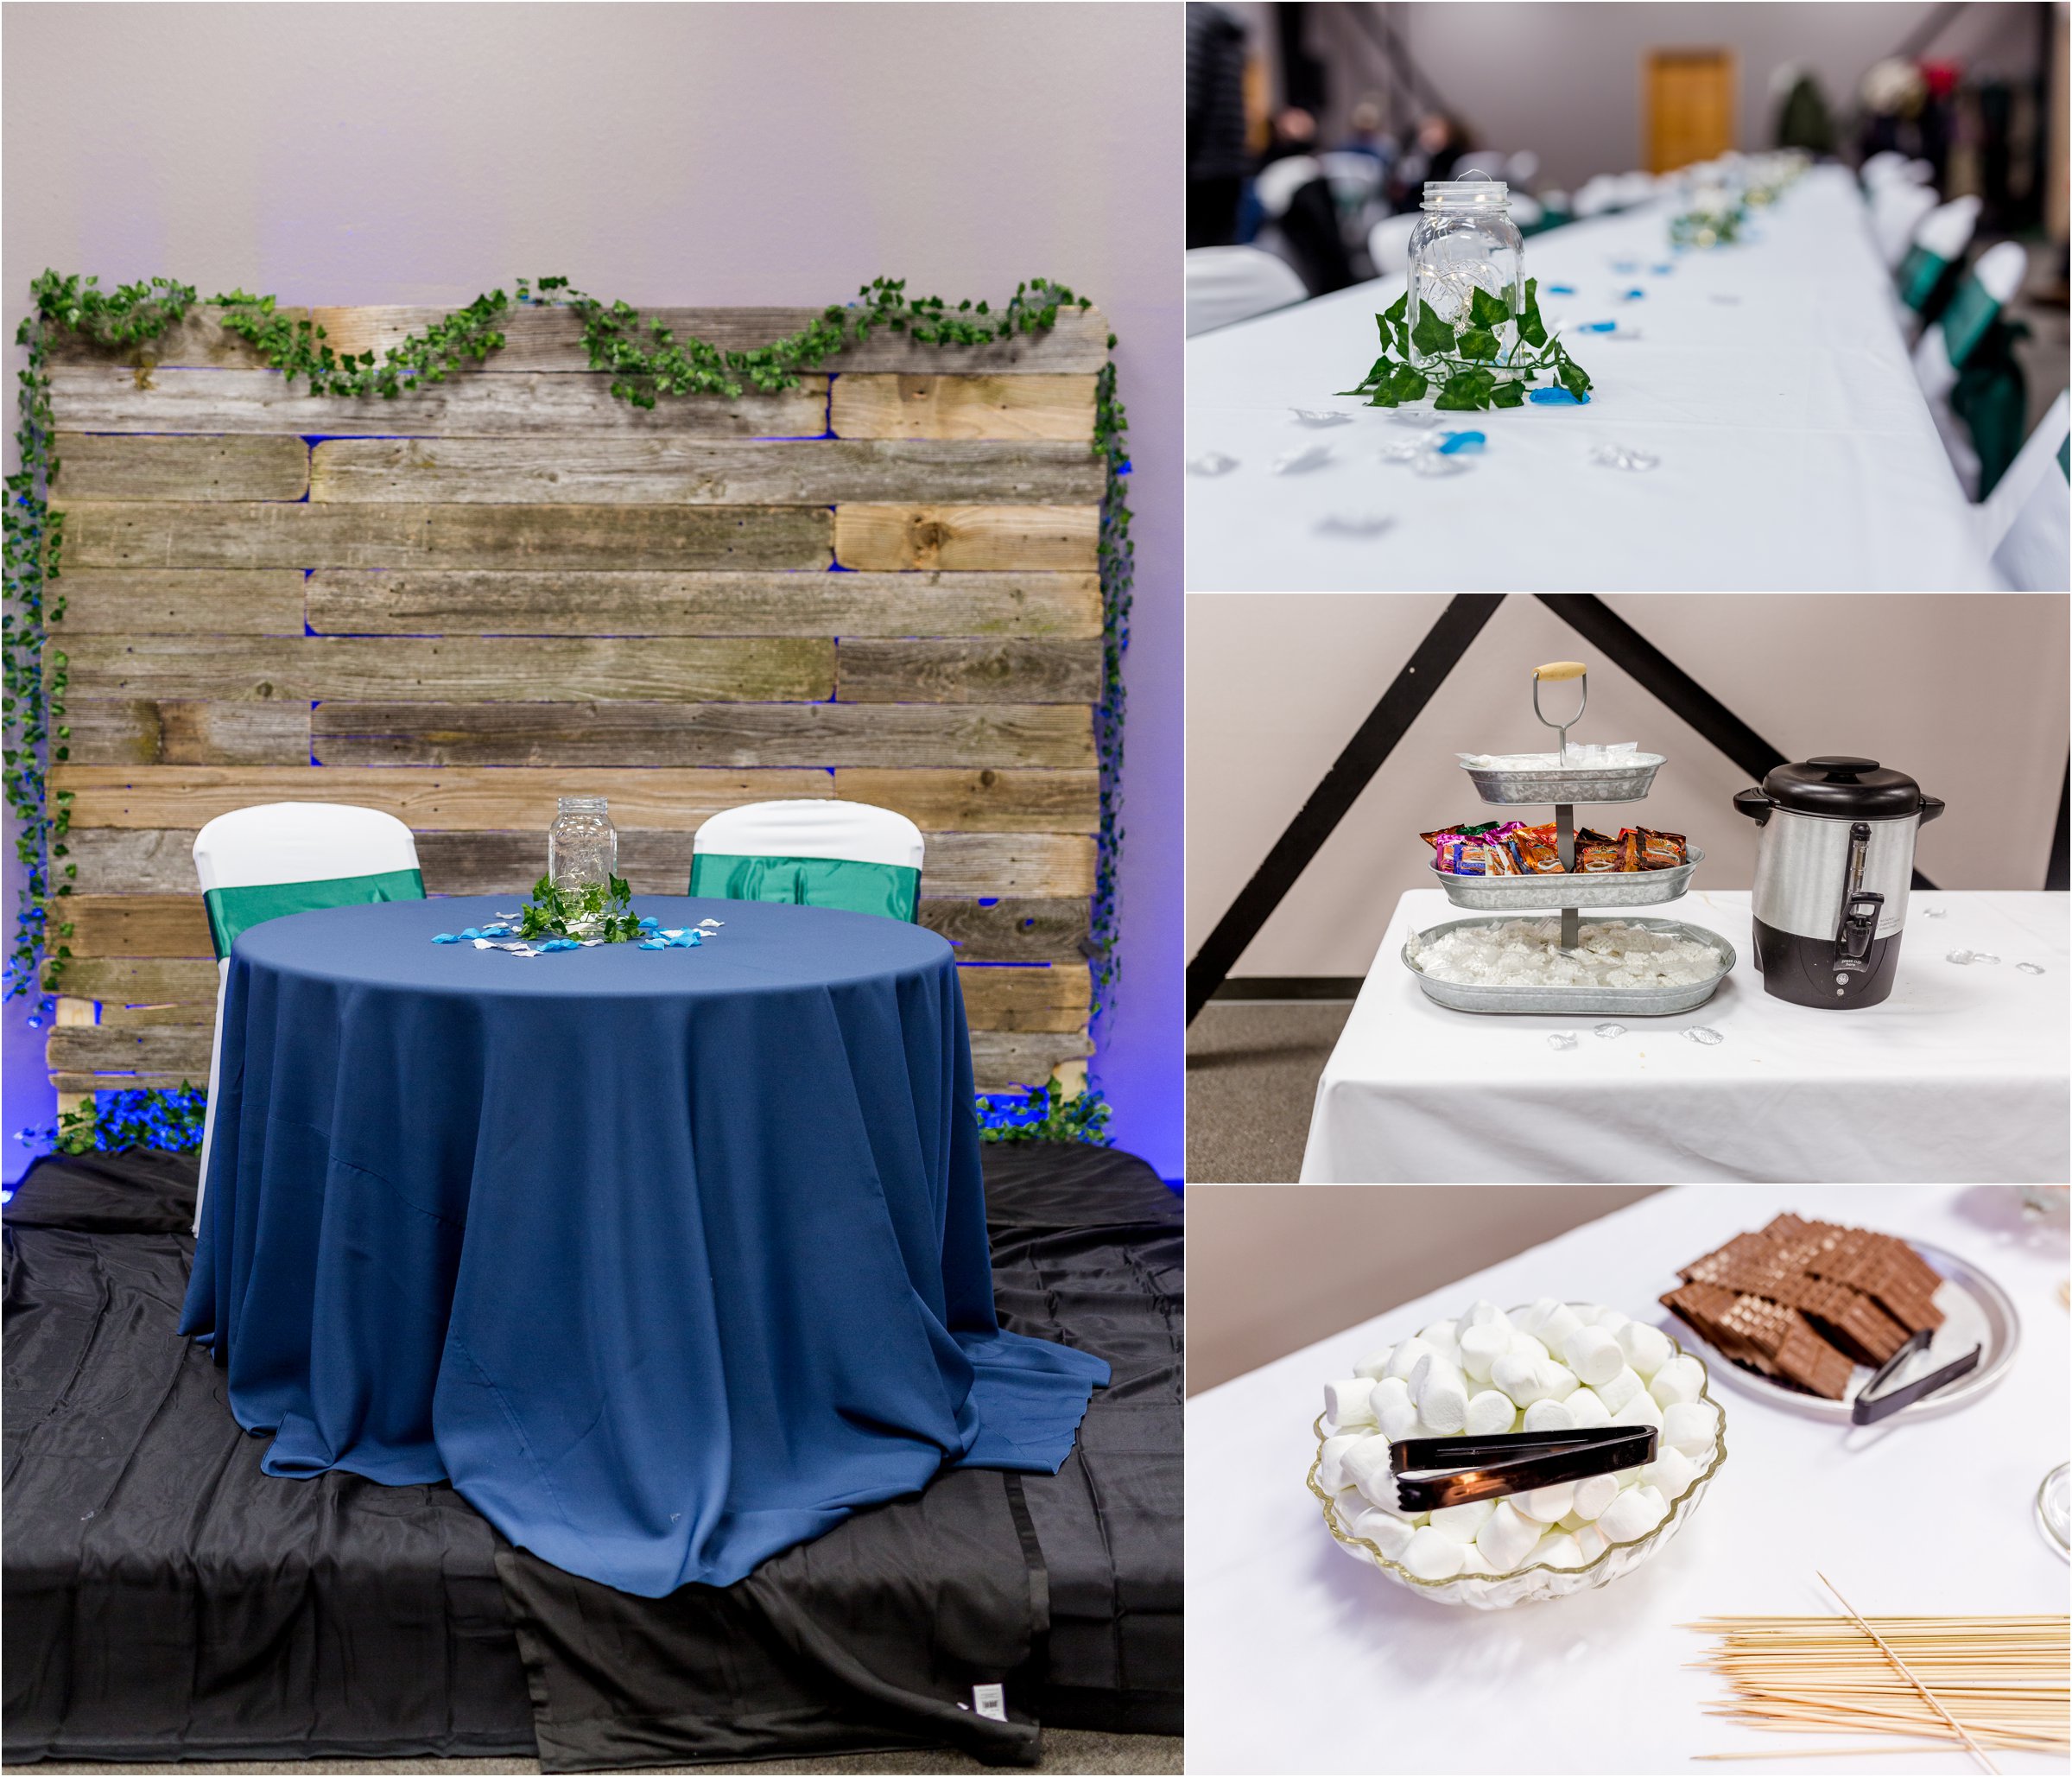 photos showing details of a wedding reception including a smores and hot chocolate bar as well as a sweetheart table